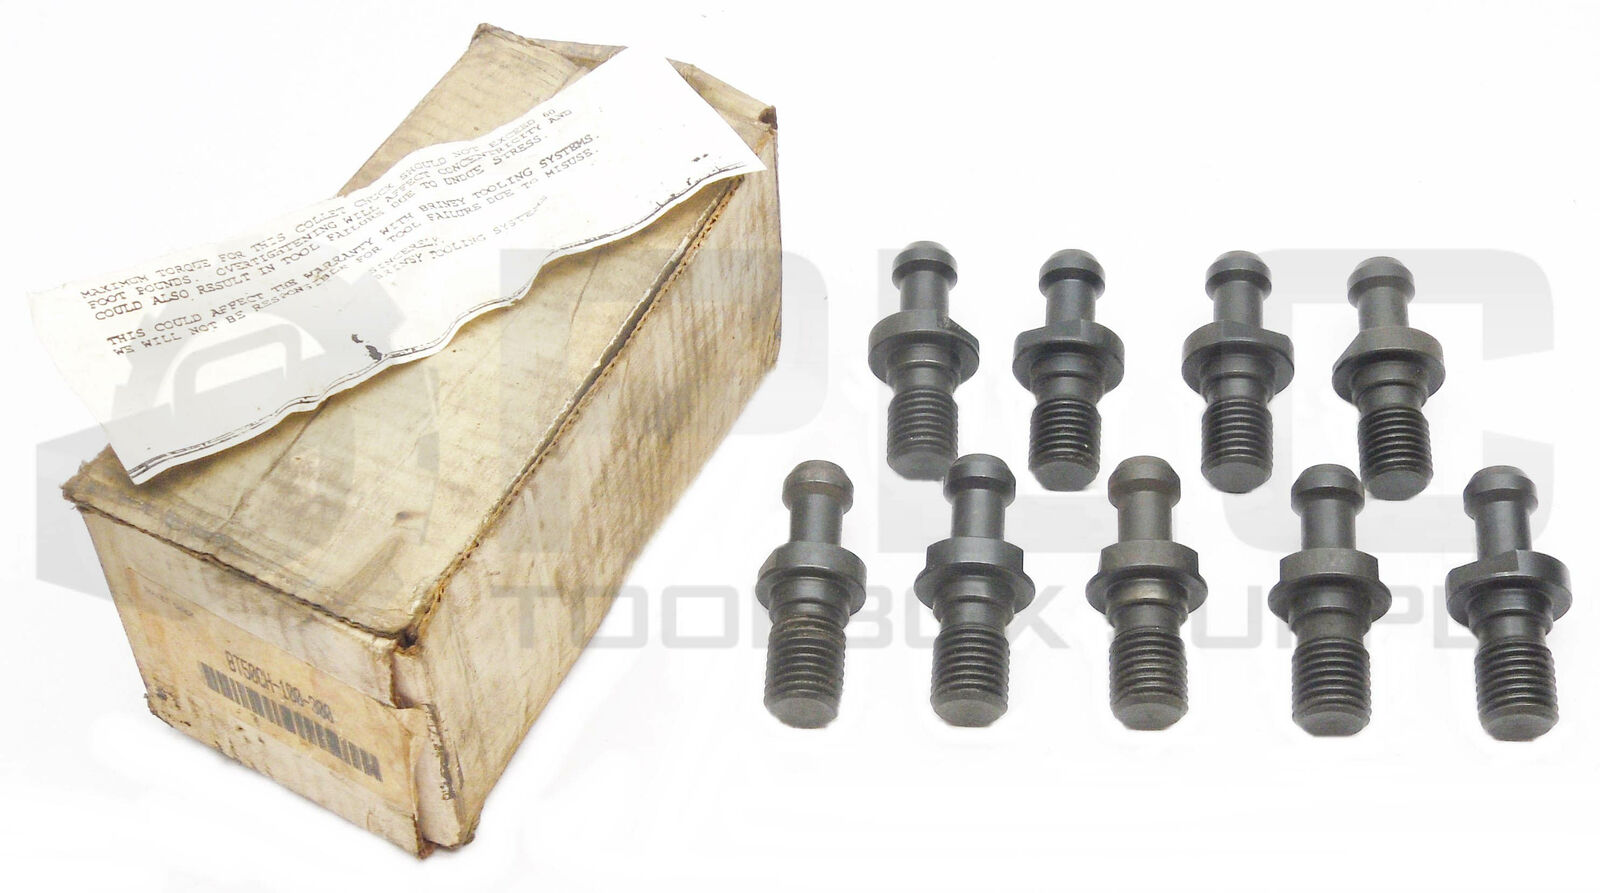 BOX OF 9 BRINEY TOOLING SYSTEMS B311-17 COLLECT CHUCK BT50CH-100-300